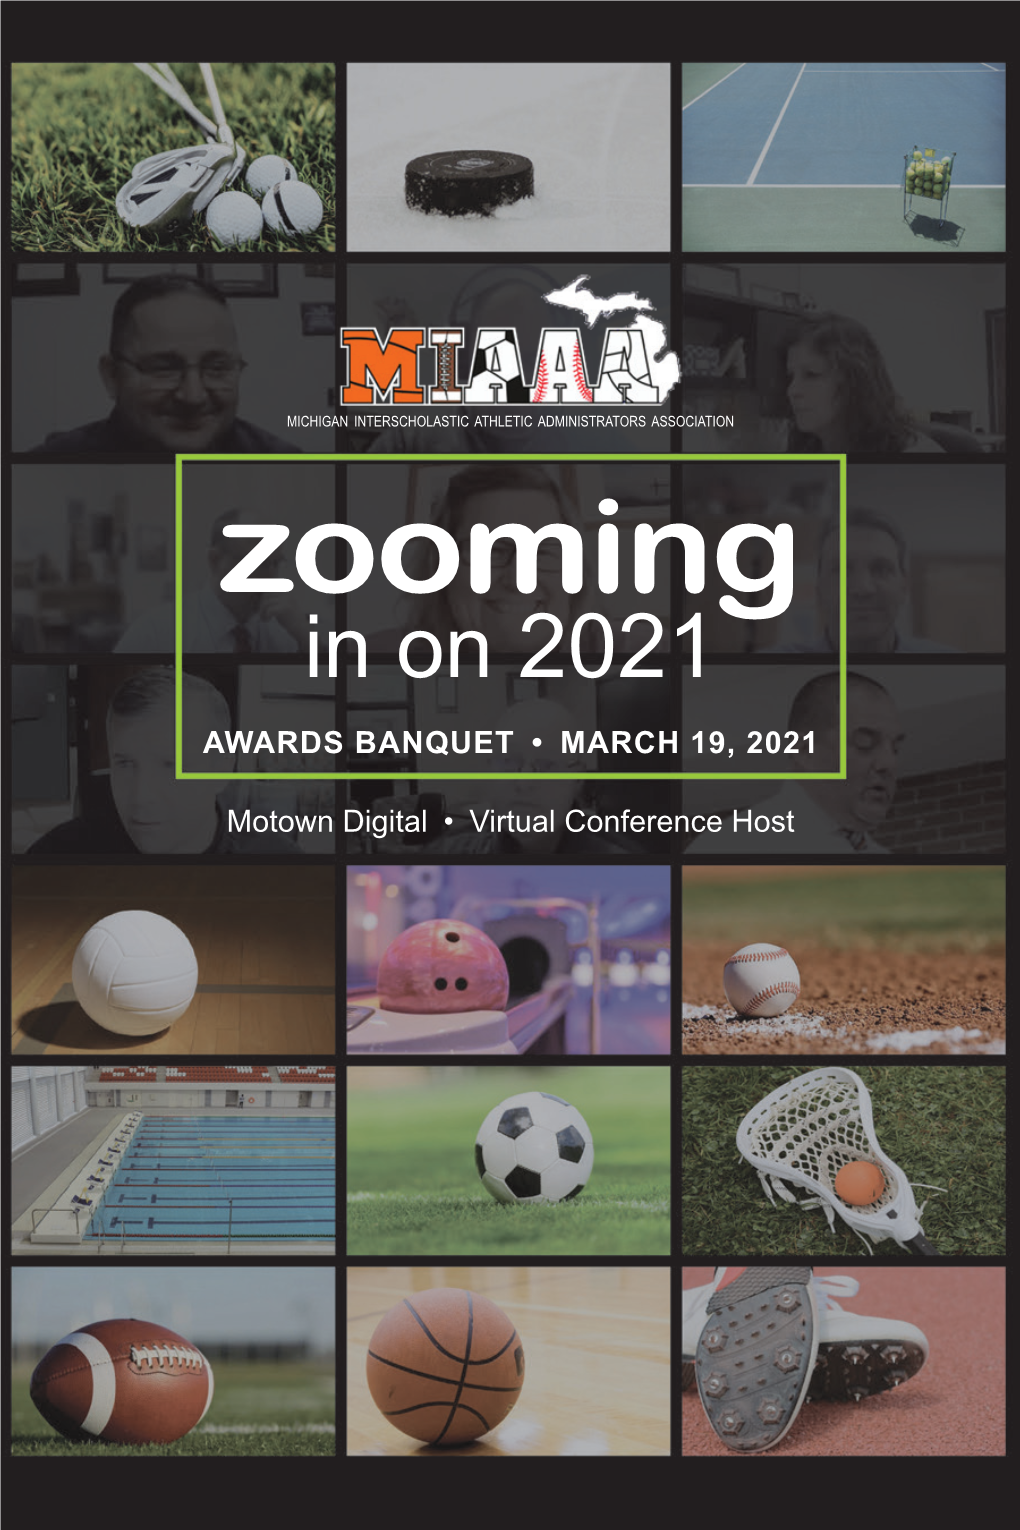 Zooming in on 2021 AWARDS BANQUET • MARCH 19, 2021